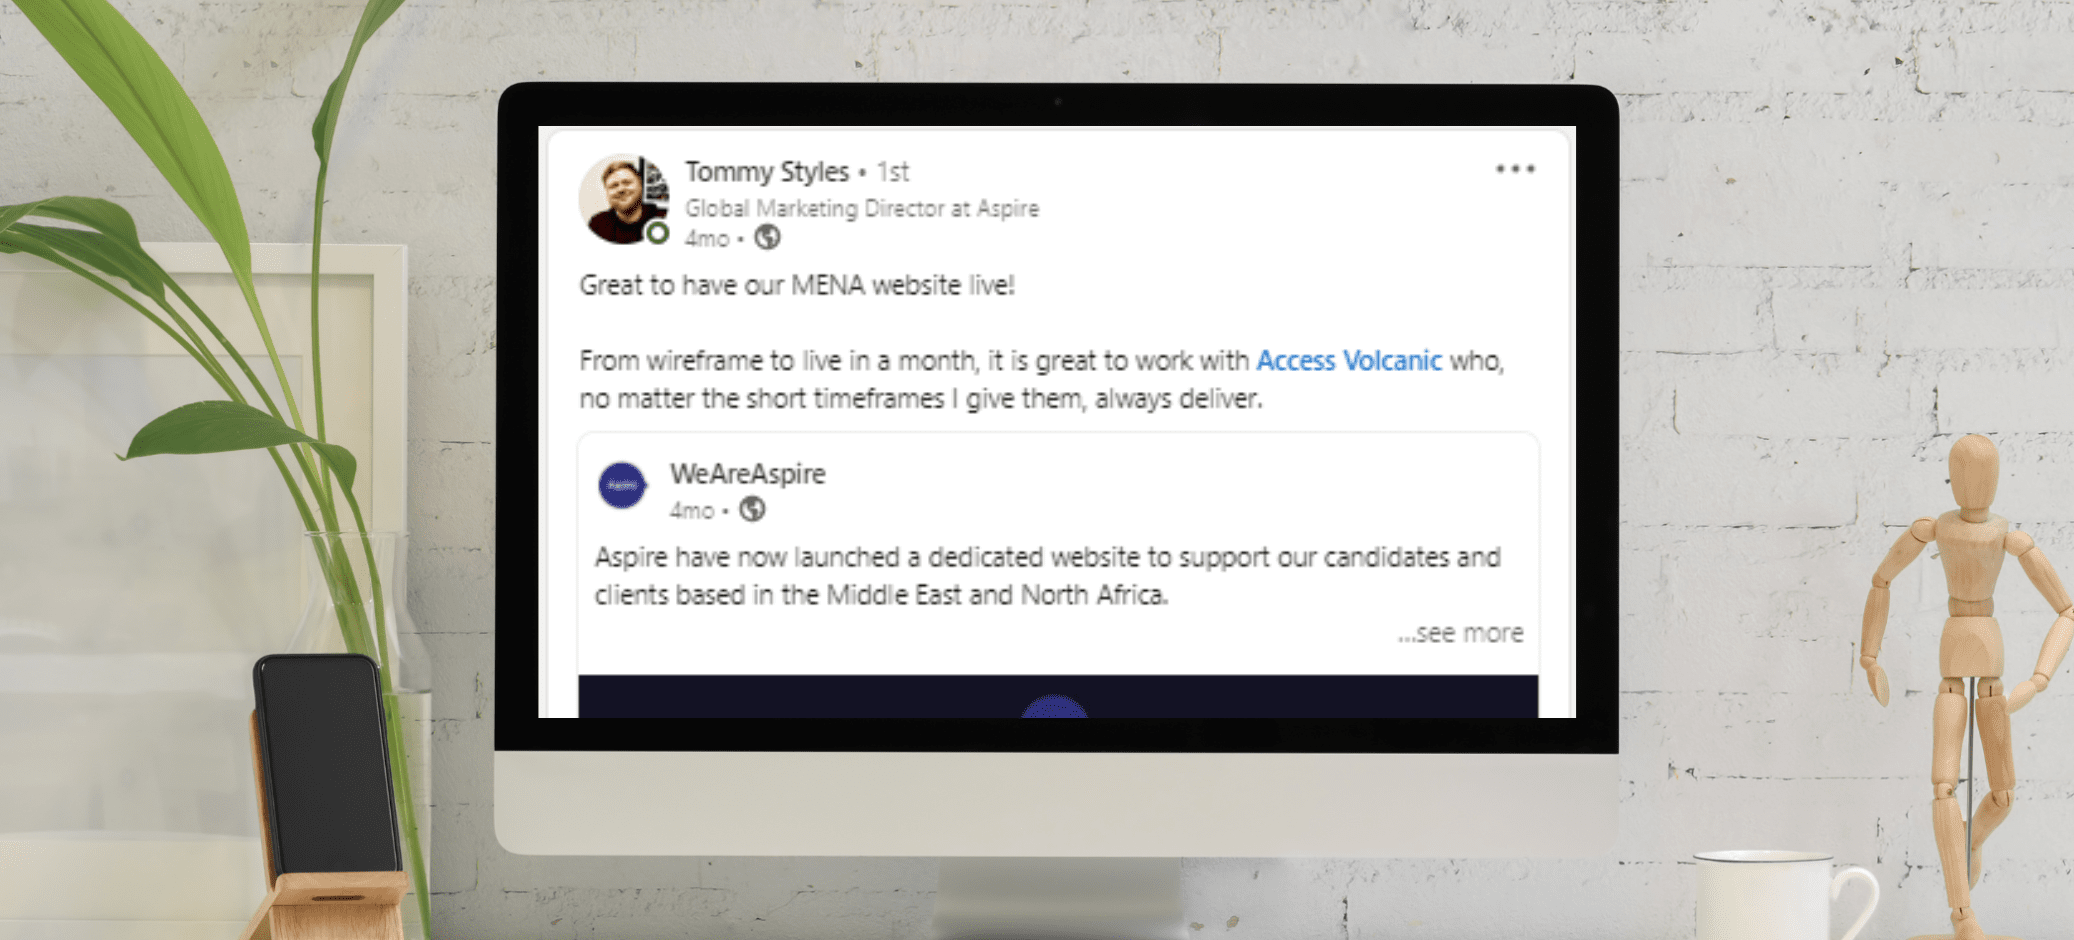 Positive testimonial posted on LinkedIn about Access Volcanic by Global Marketing Director at Aspire